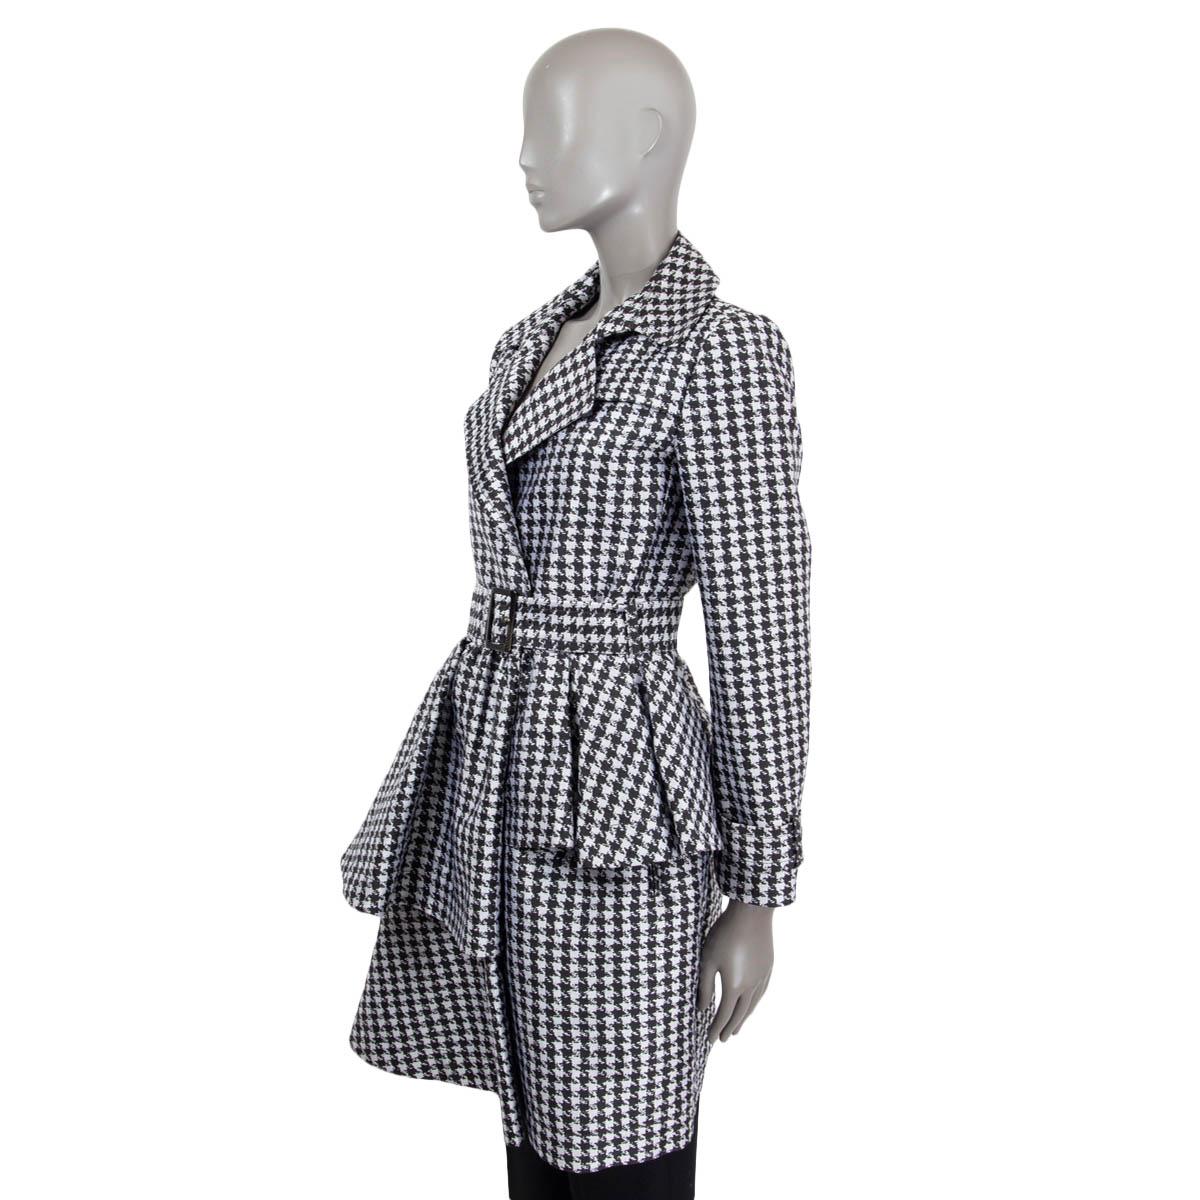 VIKTOR & ROLF black silver HOUNDSTOOTH ASYMMETRIC Coat Jacket 42 S In Excellent Condition For Sale In Zürich, CH